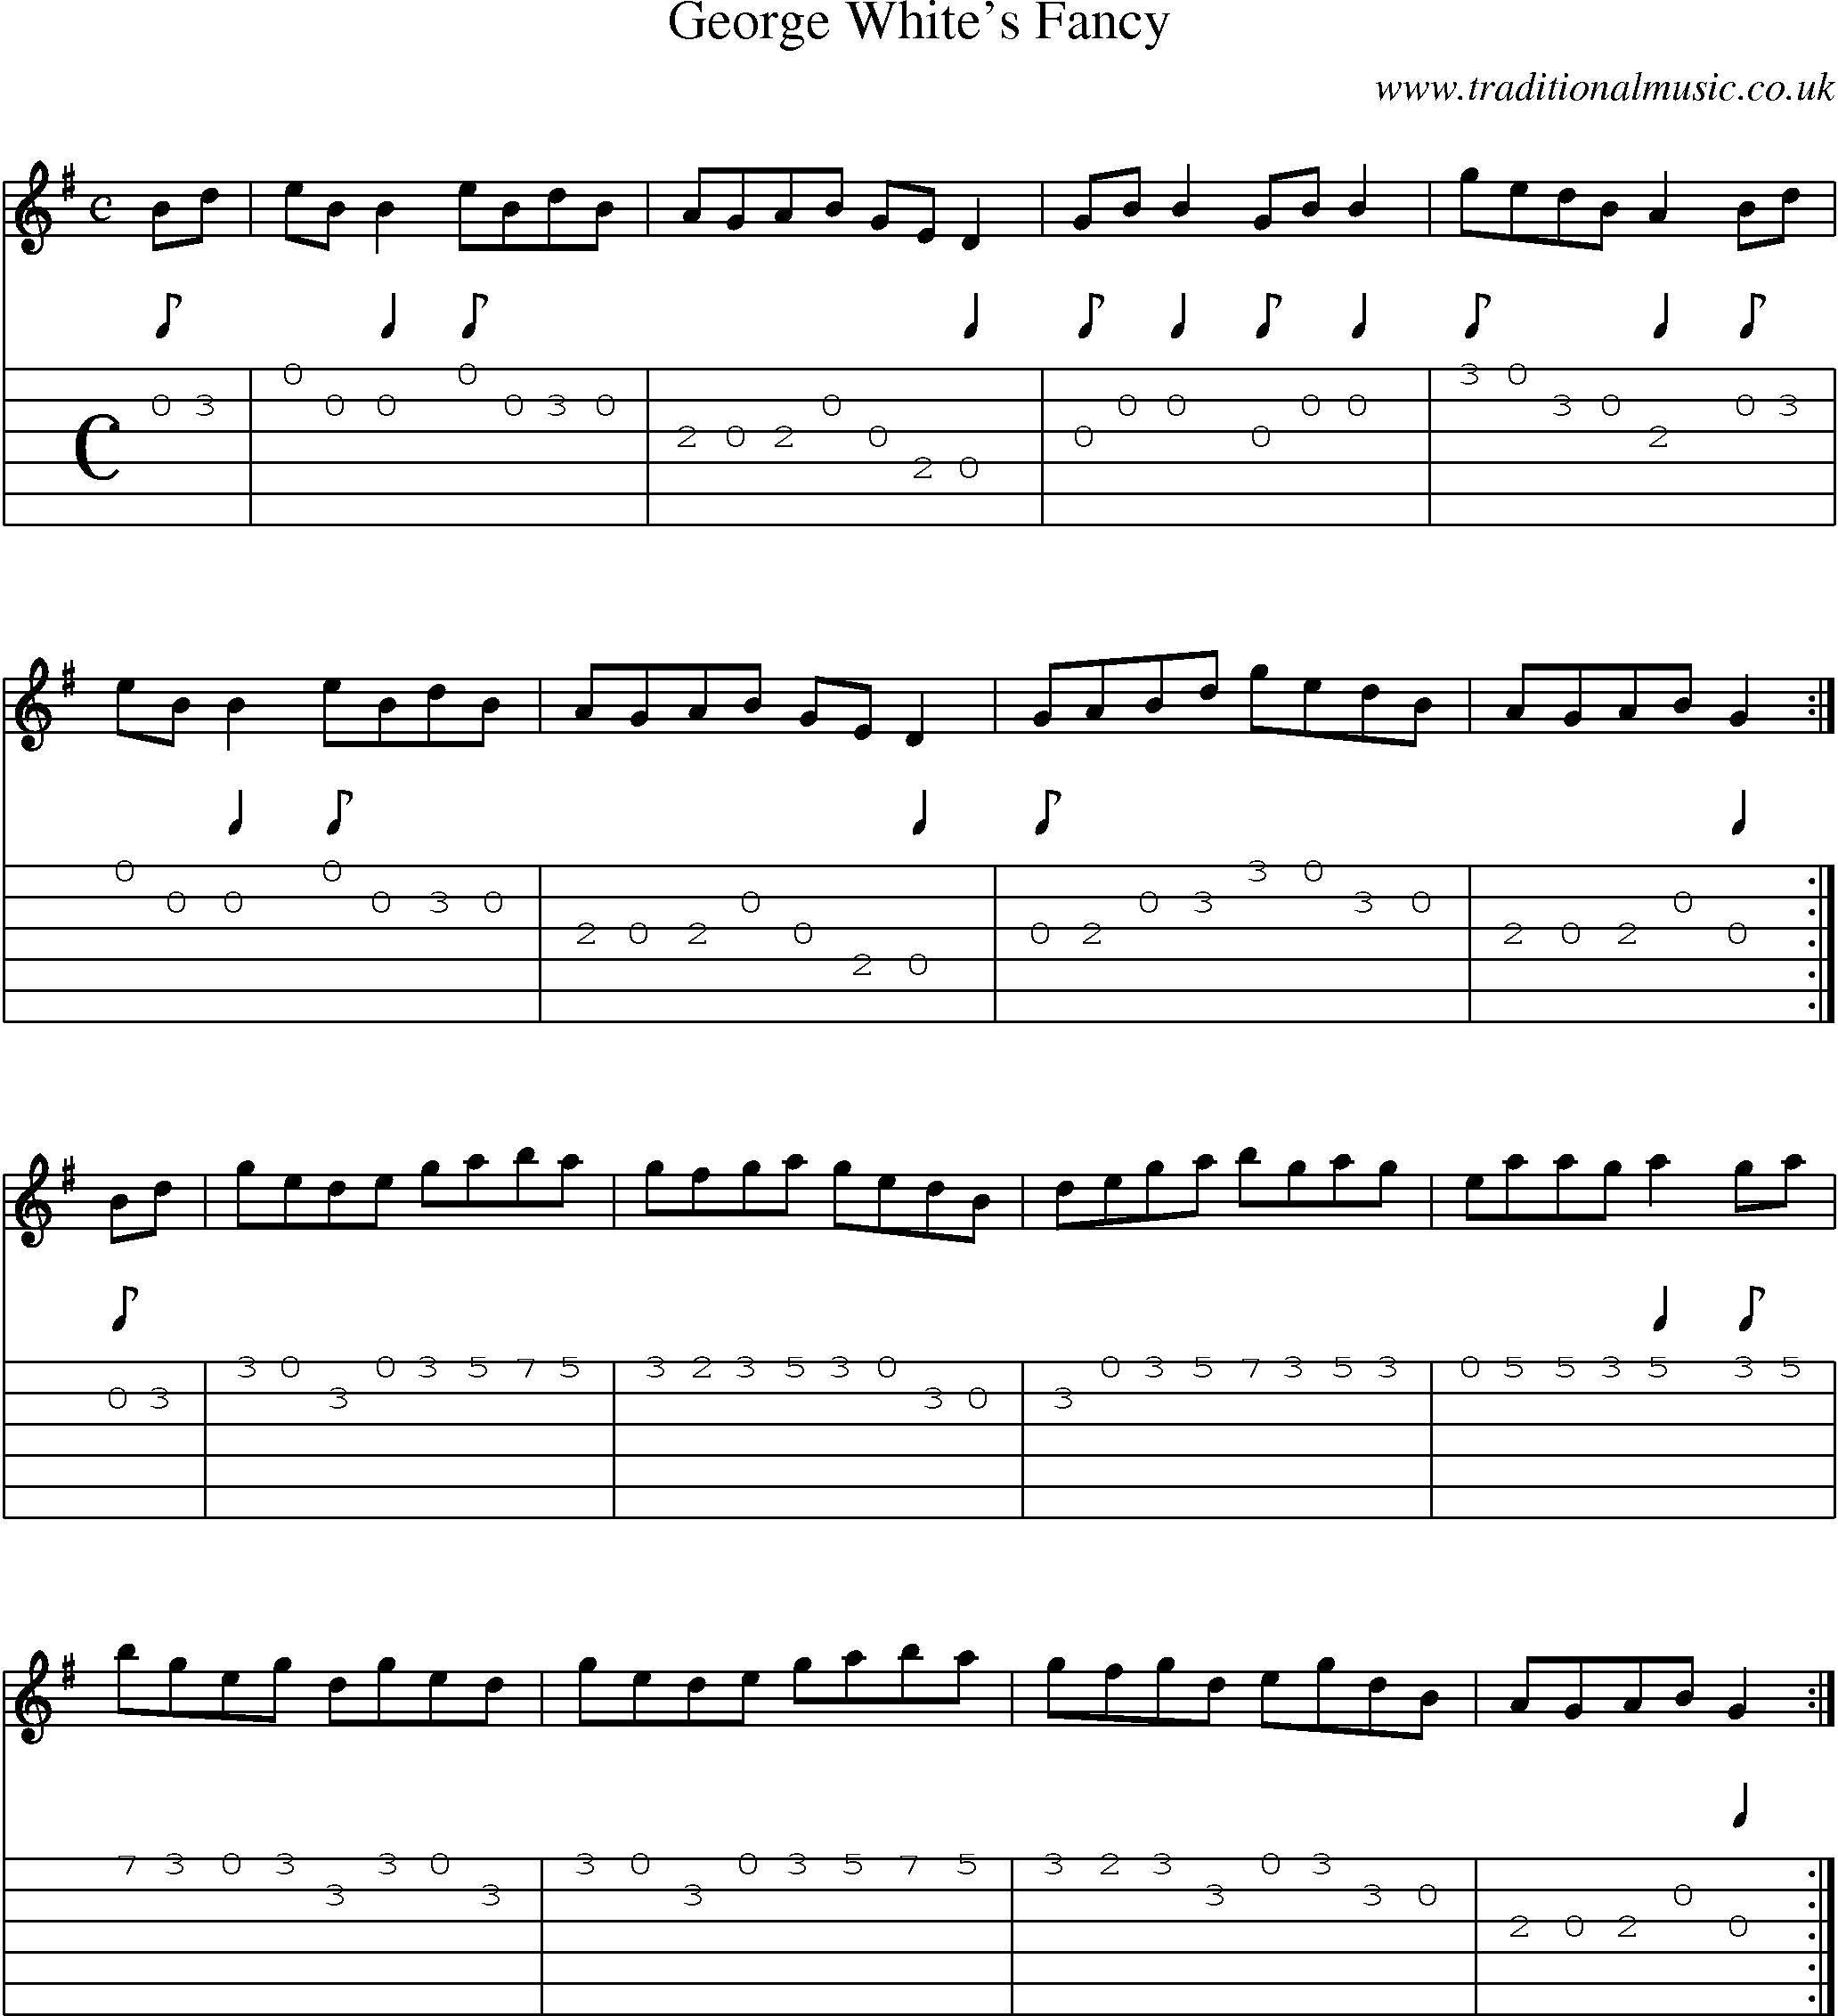 Music Score and Guitar Tabs for George Whites Fancy